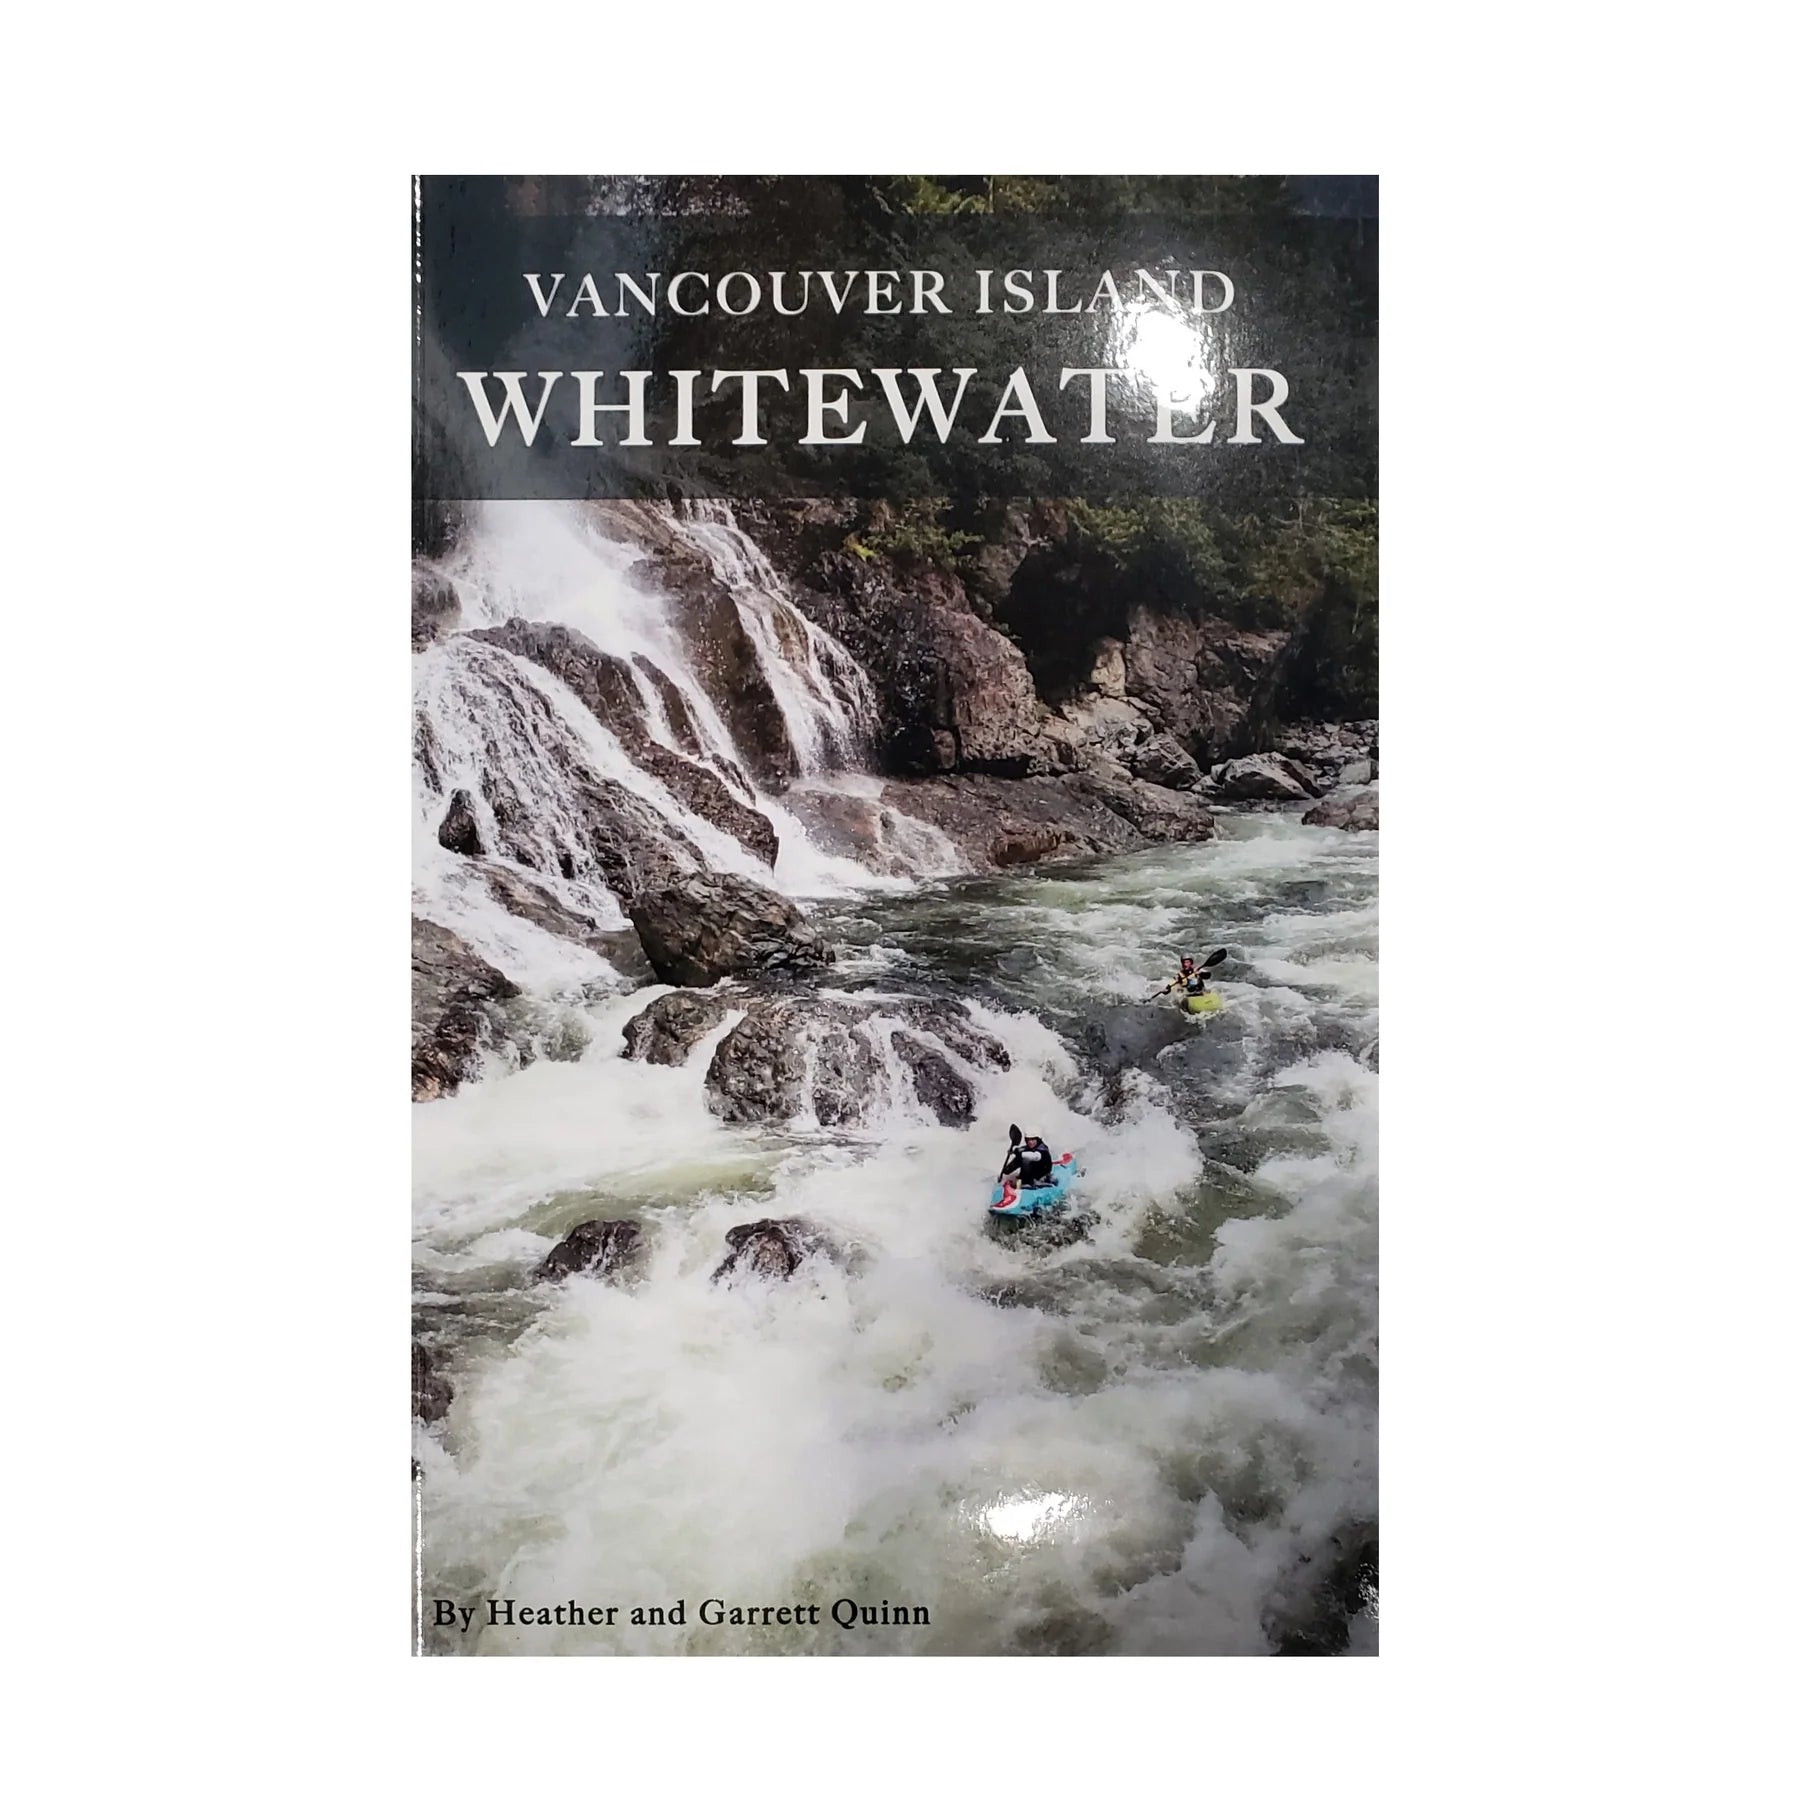 Vancouver Island Whitewater - Book by Heather and Garrett Quinn